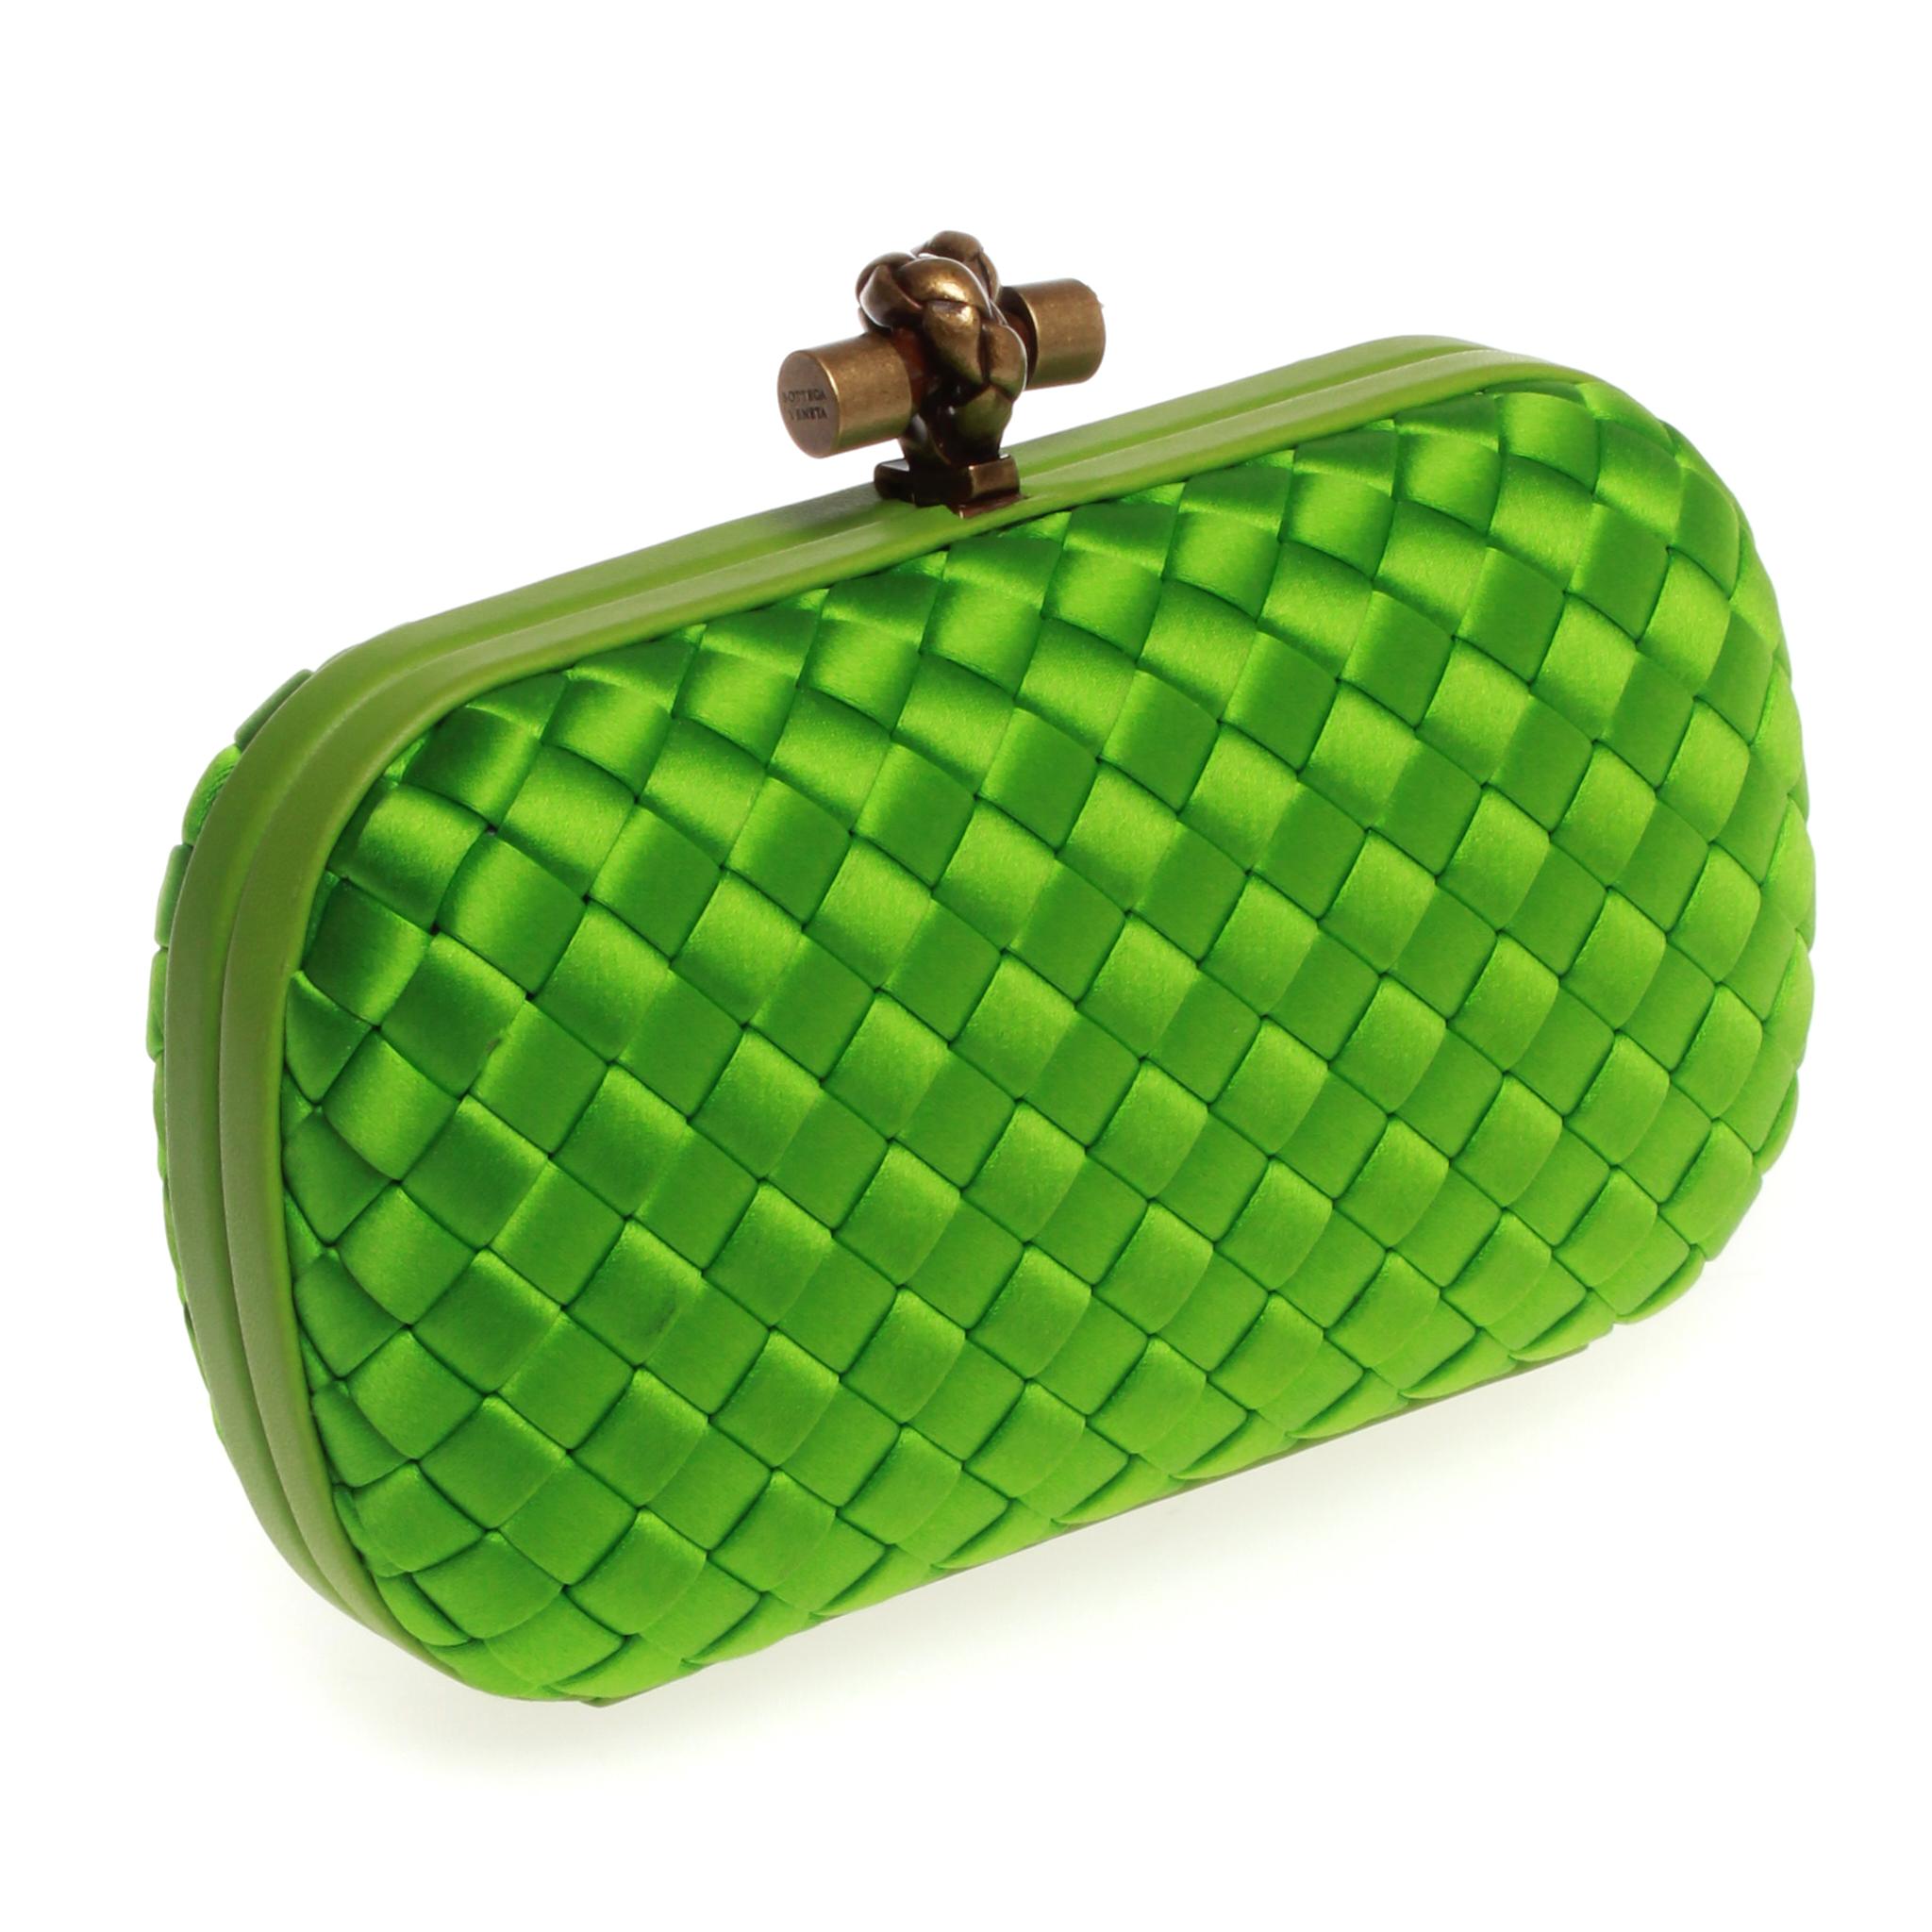 Bottega Veneta knot clutch in apple green, with dust cover and gold hardware. In great condition